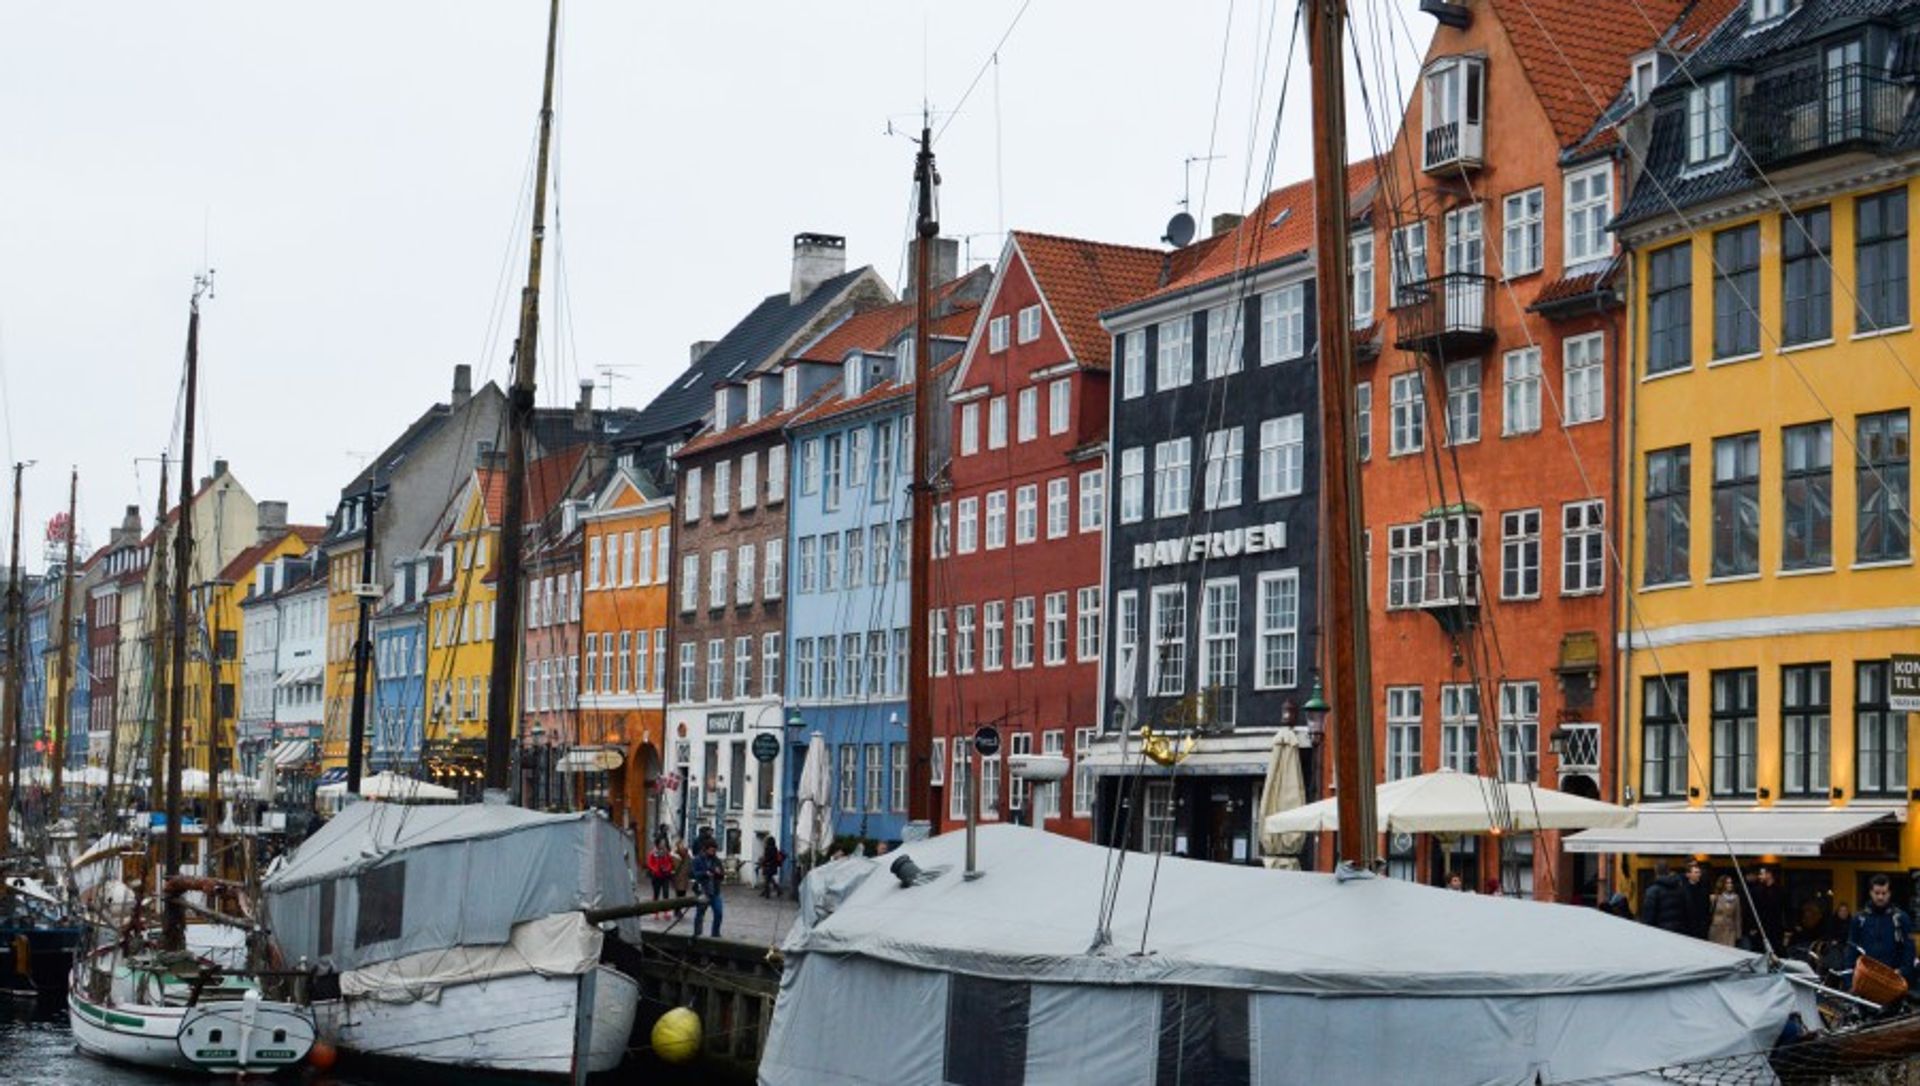 The most famous touristy place and the face of Copenhagen on postcards